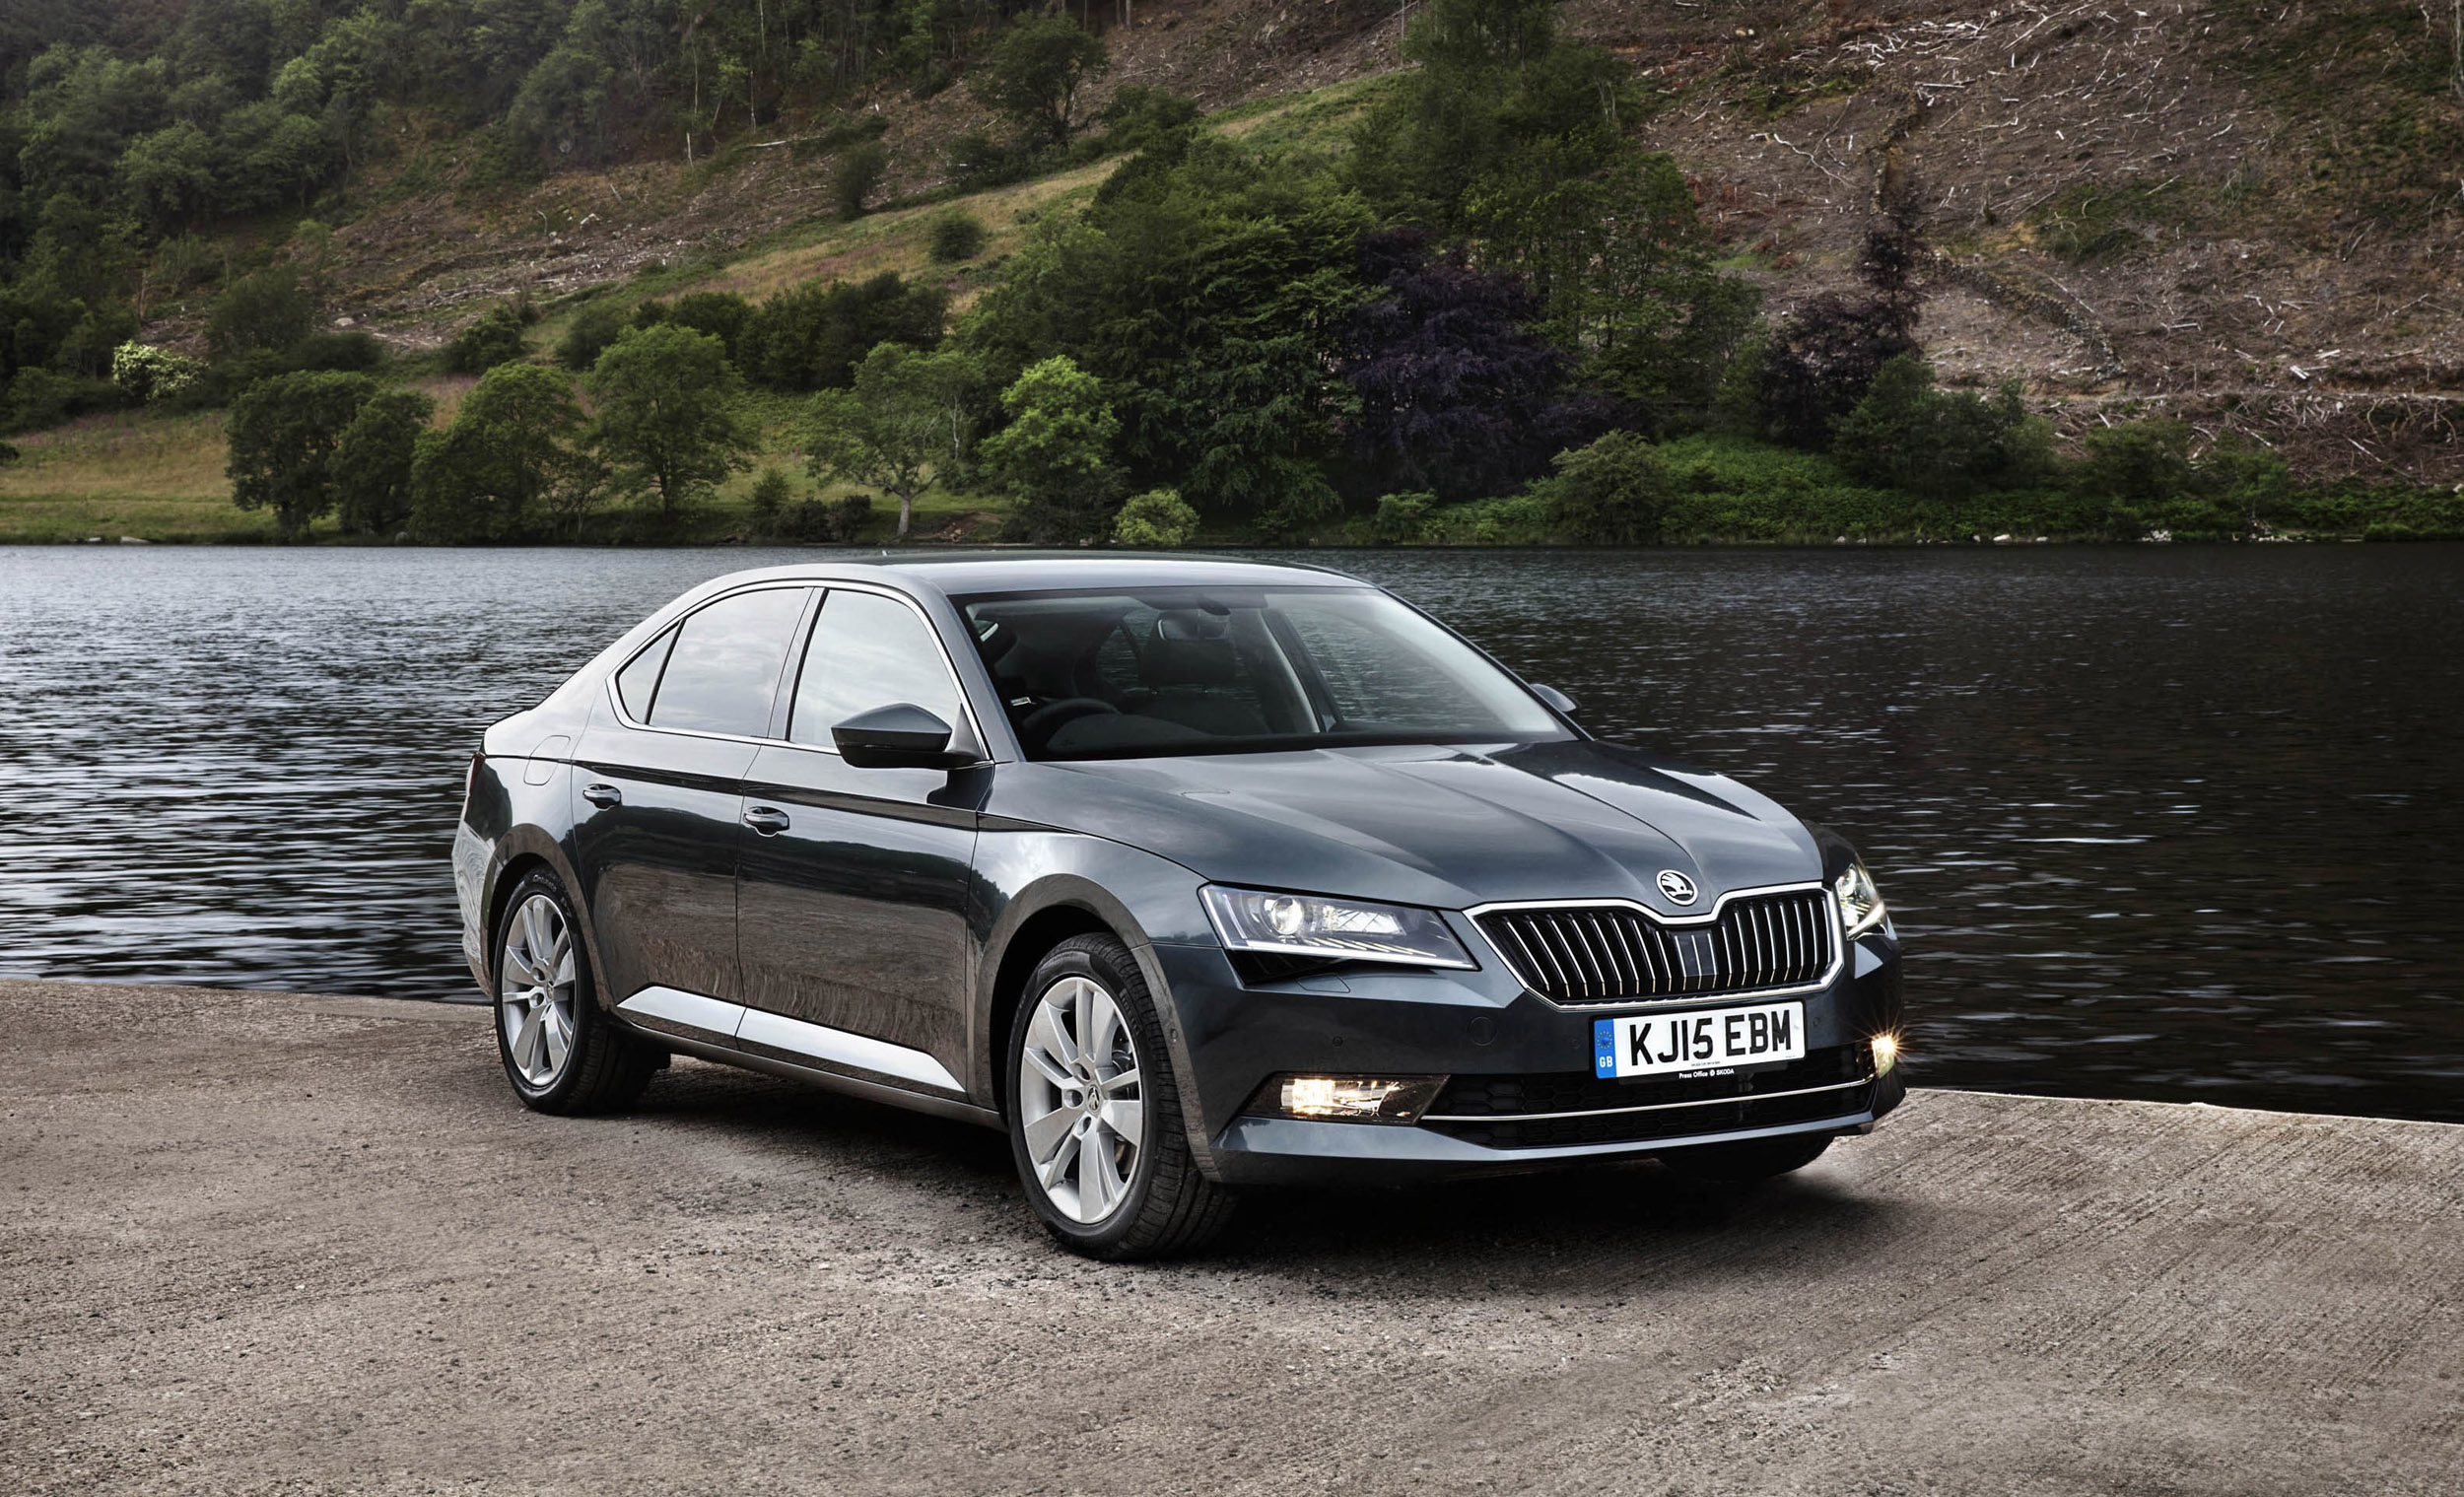 Skoda Superb Review The Best Large Family Car To Drive Evo